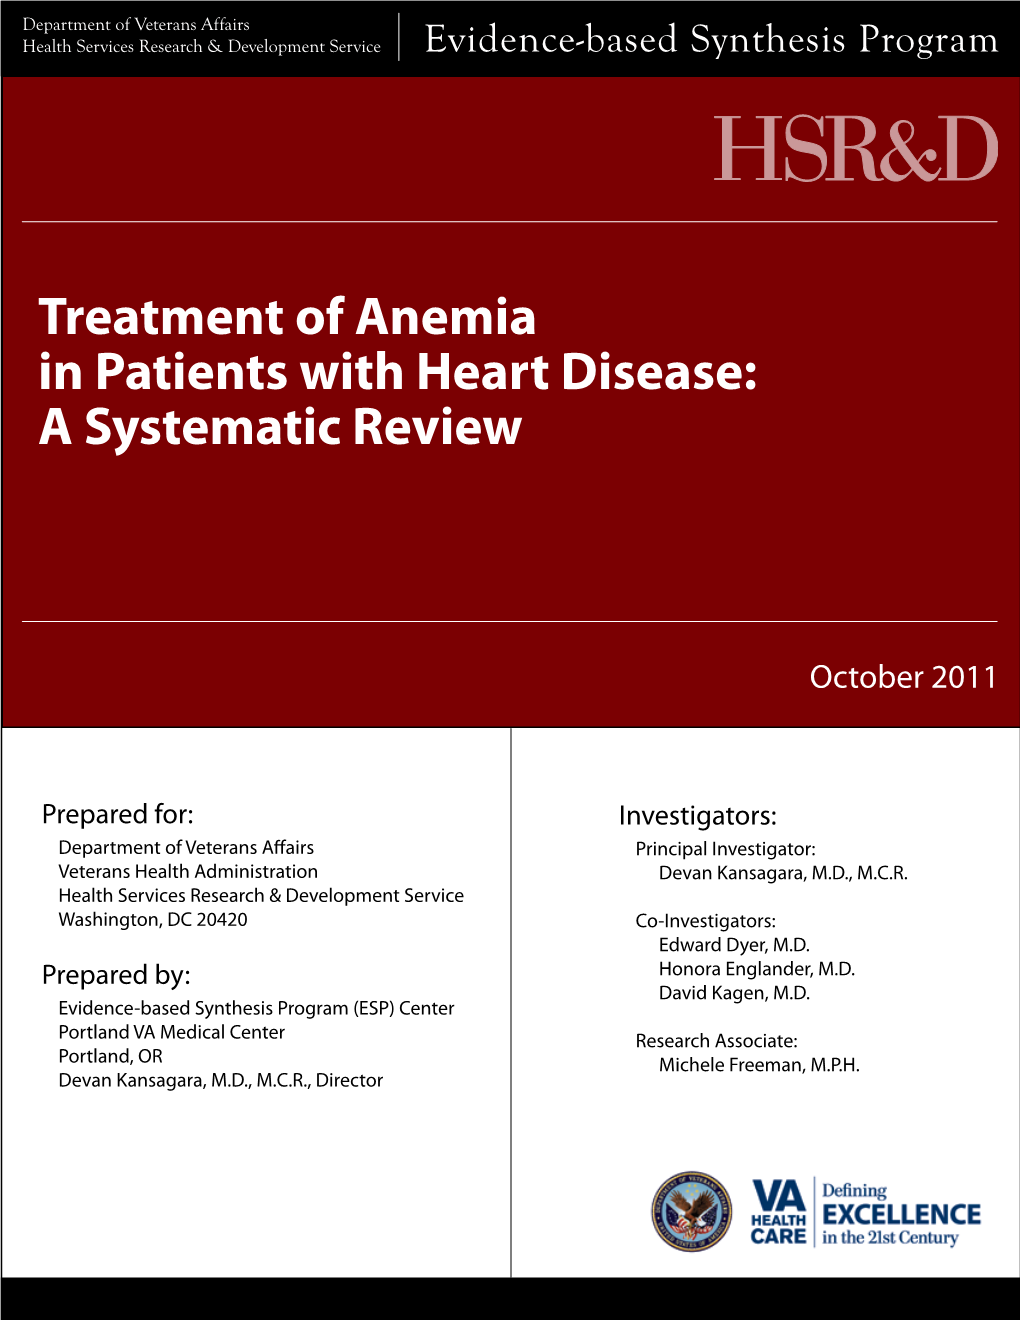 Treatment of Anemia in Patients with Heart Disease: a Systematic Review